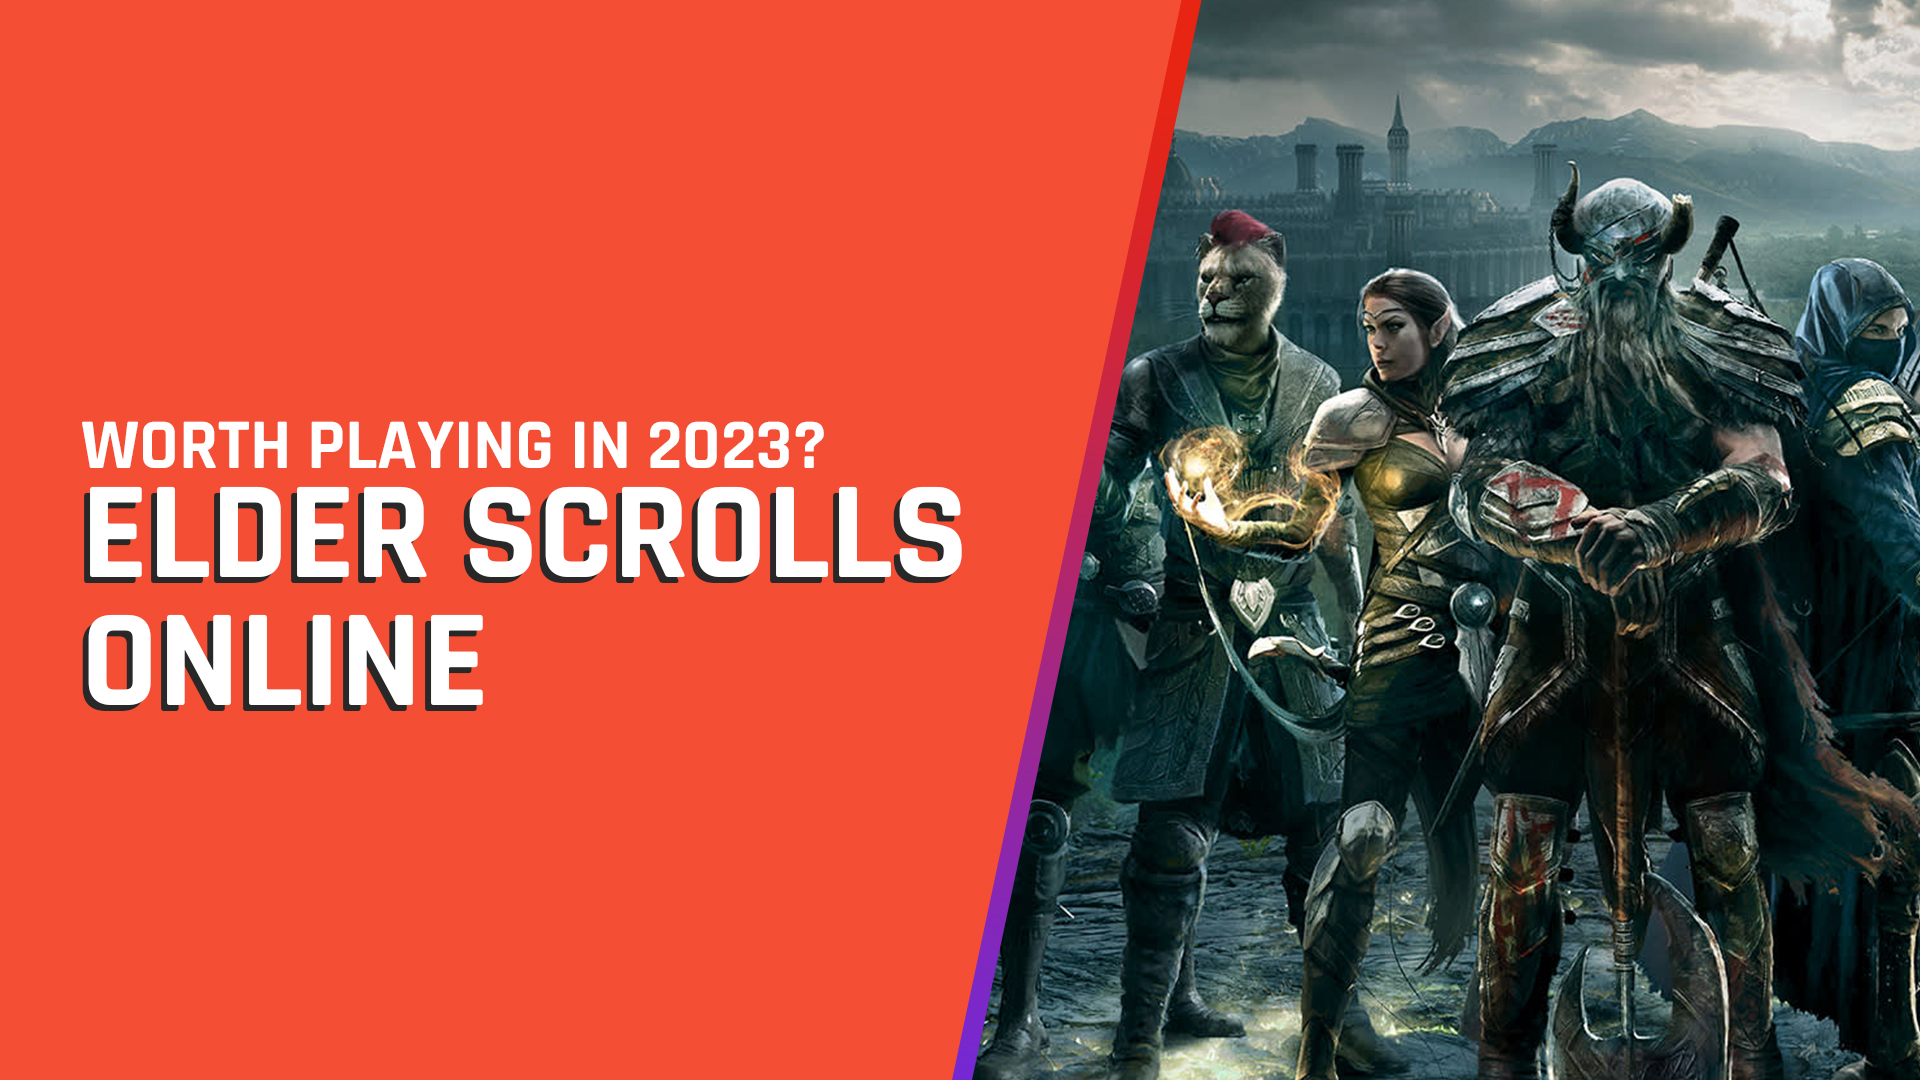 Is The Elder Scrolls Online worth playing in 2022?